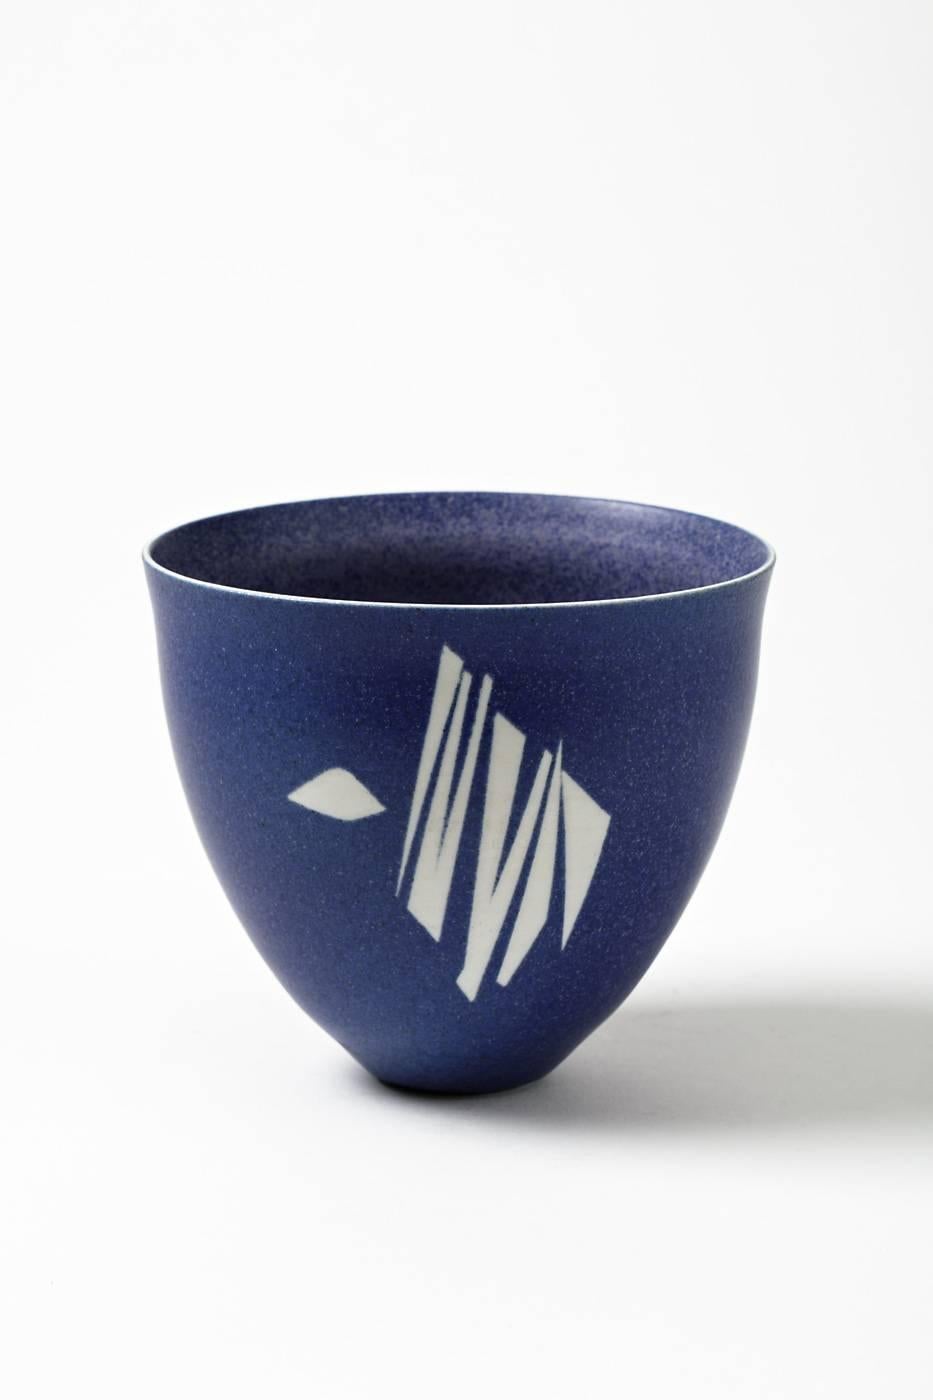 A porcelain bowl by Robert Deblander with blue glaze and white geometrical decoration.
Handwritten signature under the base and artist monogram, circa 1990.
Unique piece.